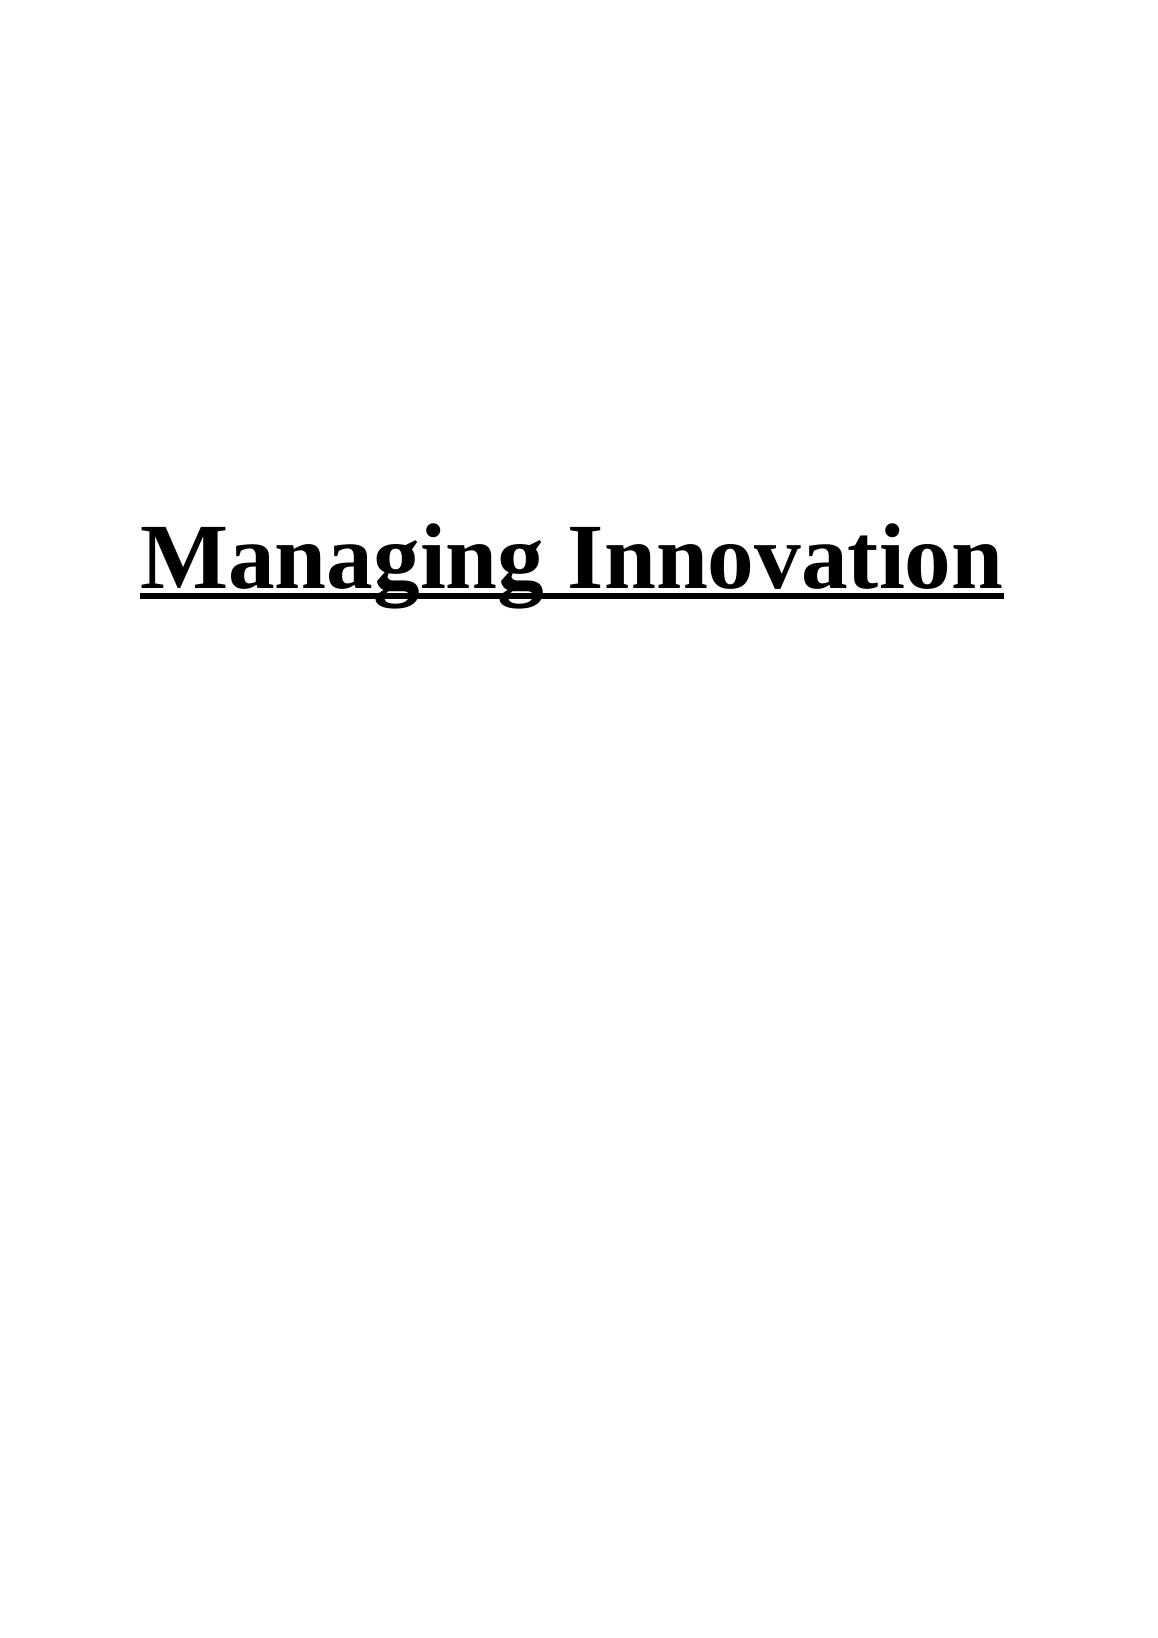 Managing Innovation: Application of Diffusion Innovation Theory in Historical Development Context_1